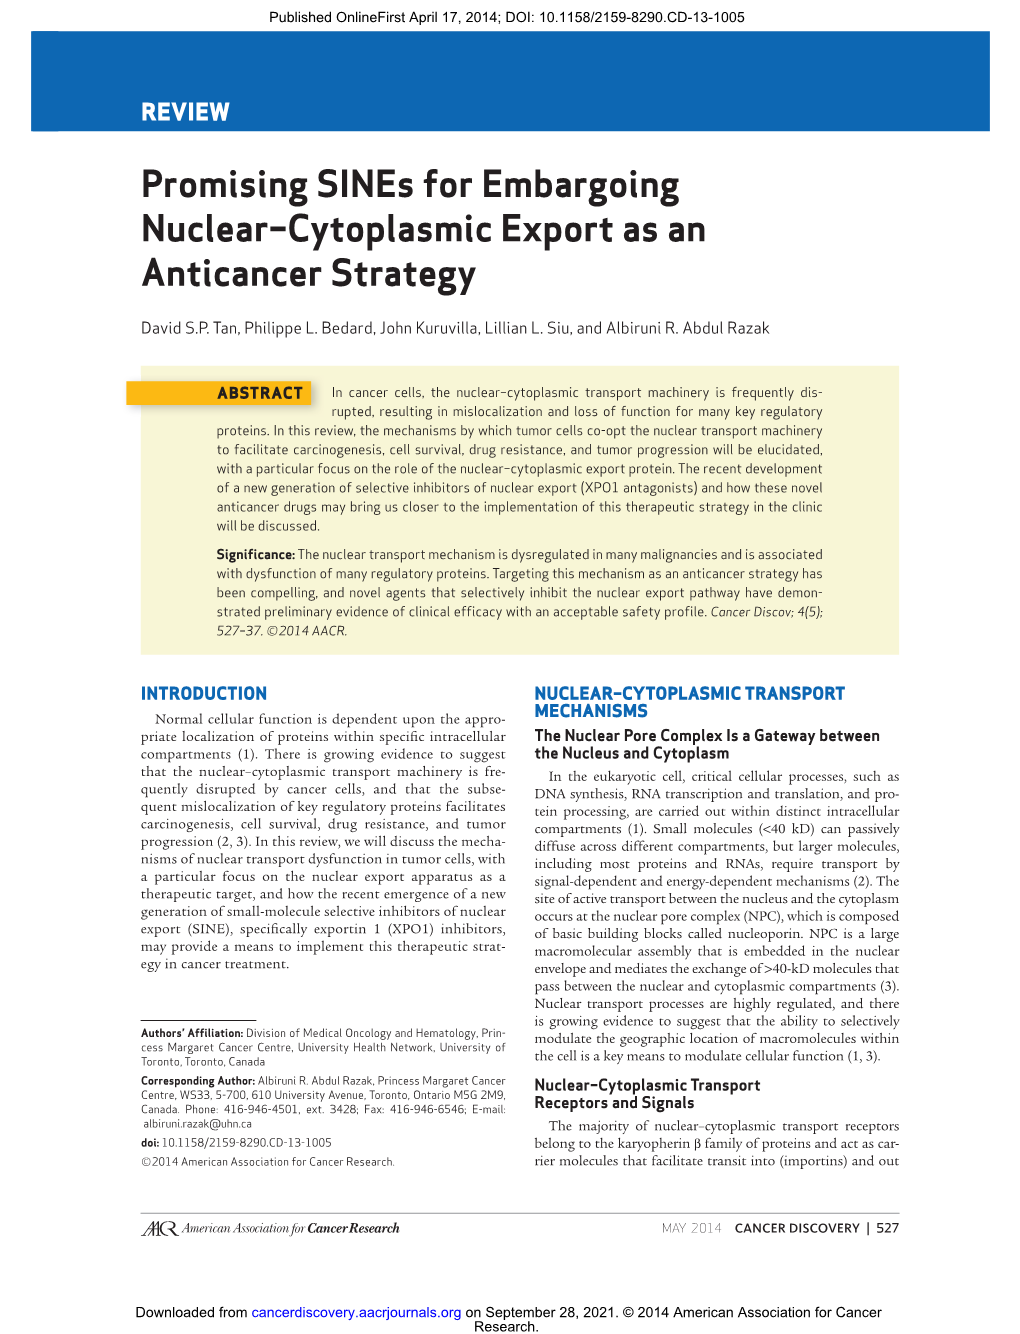 Promising Sines for Embargoing Nuclear–Cytoplasmic Export As an Anticancer Strategy